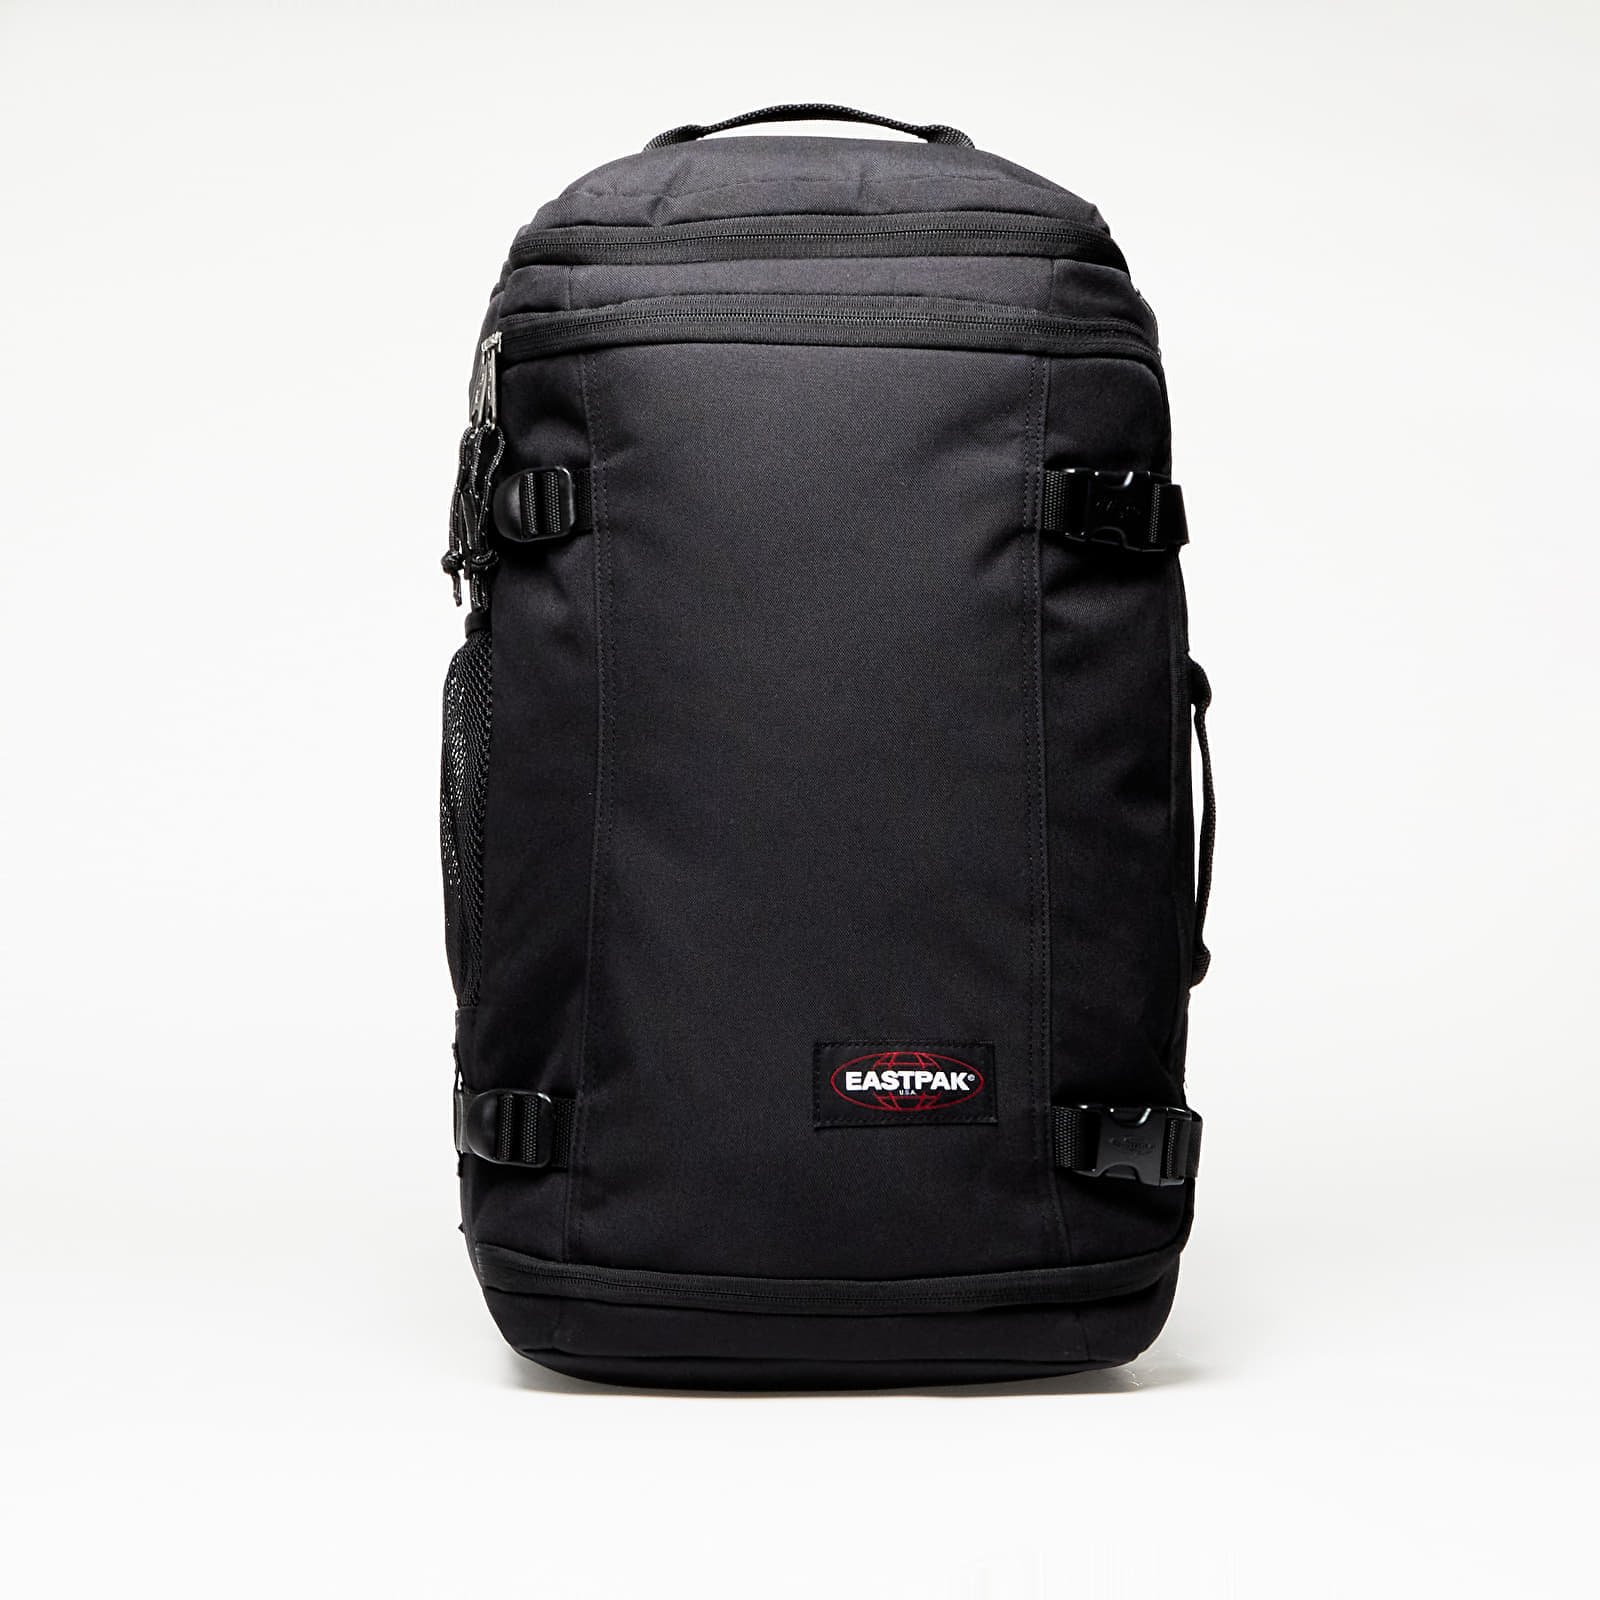 Carry Bagage Cabine Backpack